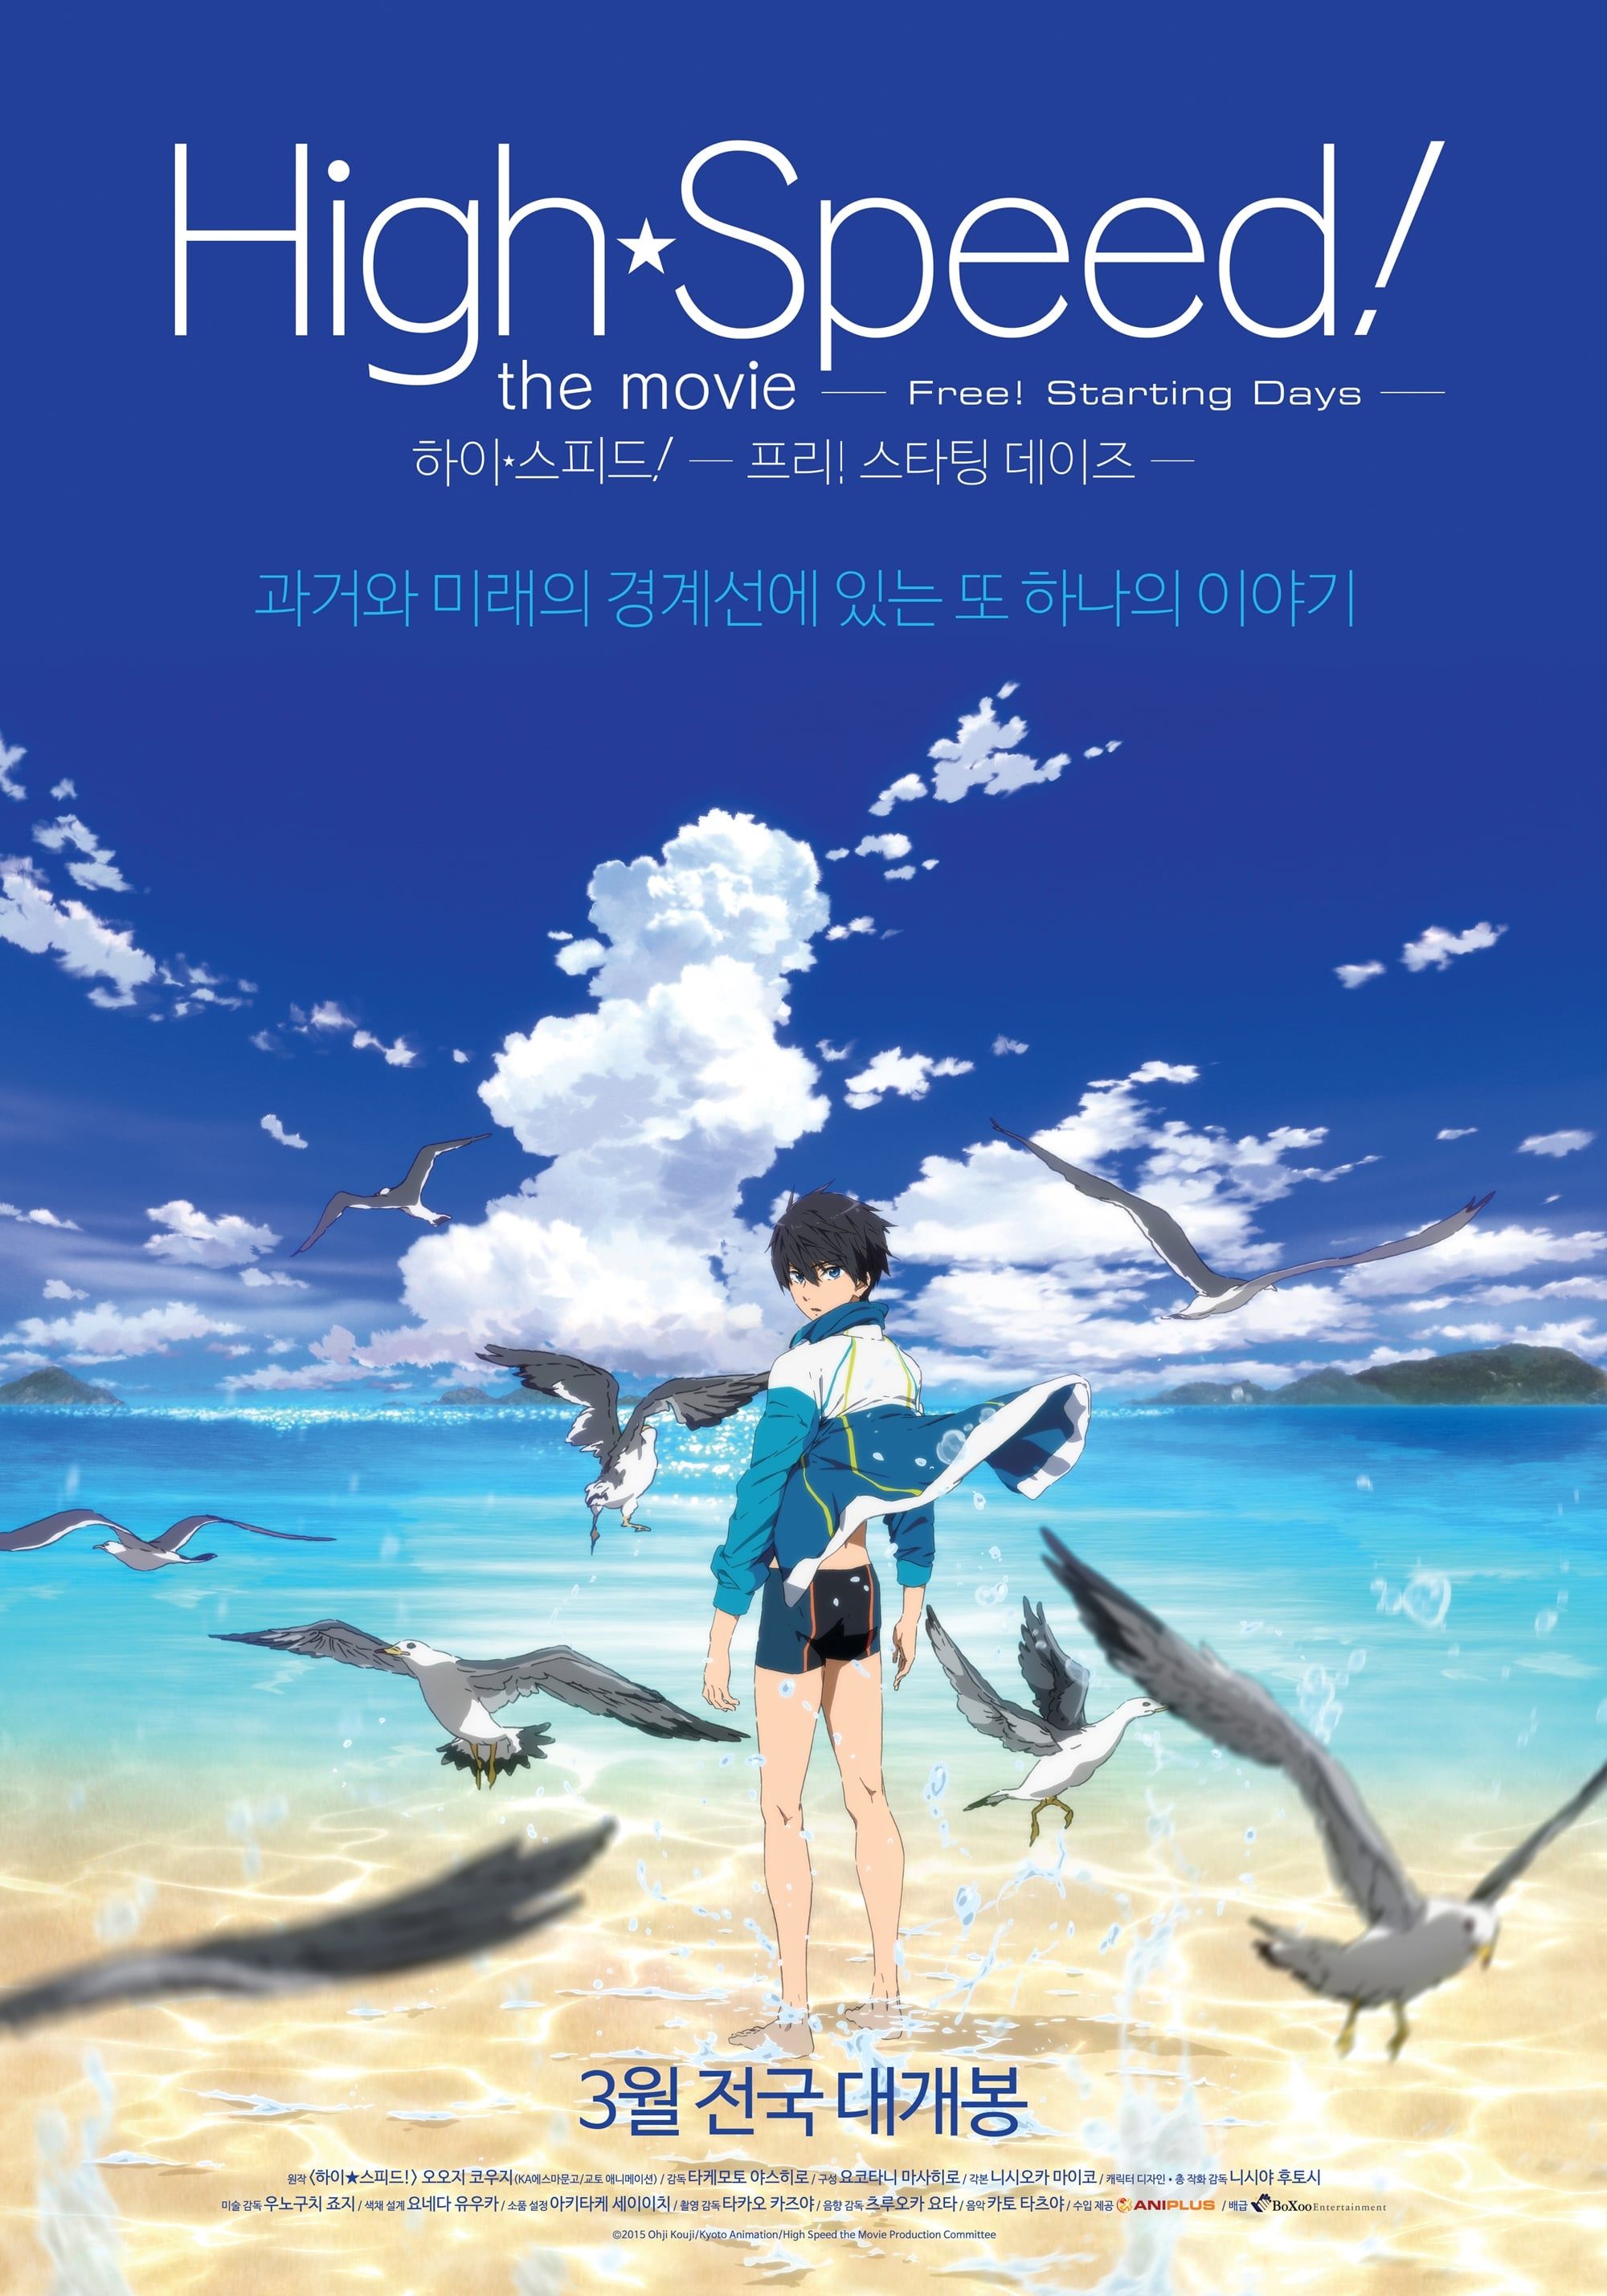 [New Released] High☆Speed!: Free! Starting Days (Movie) (Sub)